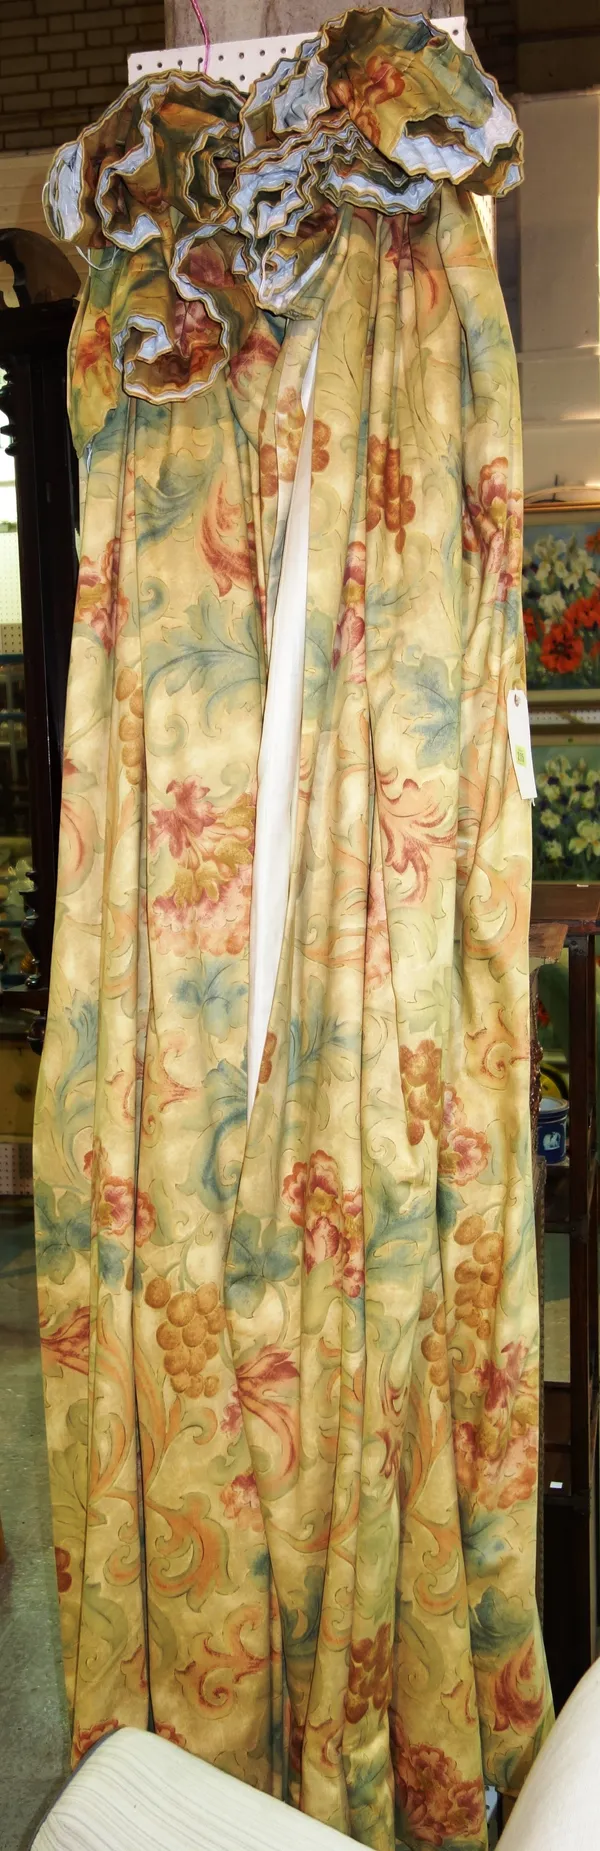 Curtains; two pairs of lined pale yellow ground and floral patterned curtains, the fall 219cm x 104cm wide. D6